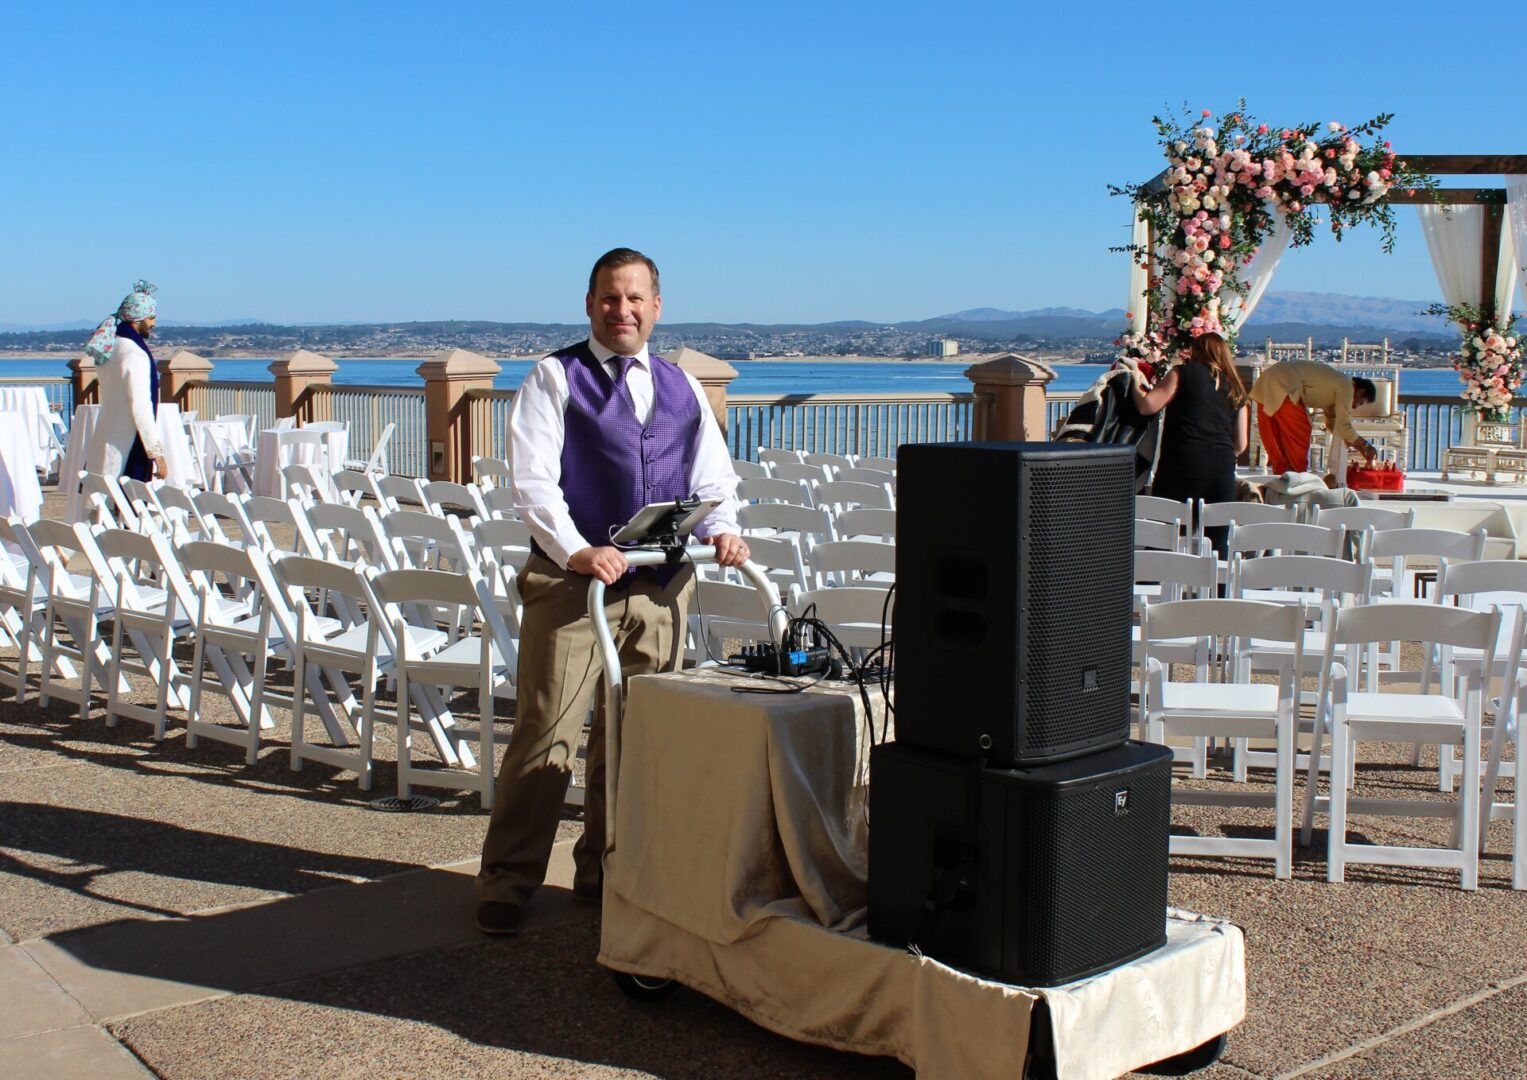 DJ Justin Warwick owner of DJ Enterprises Mobile Disc Jockey with his premium battery powered 1,200 Watt mobile sound system for an Indian Baraat Procession in Monterey California. The Monterey Plaza Hotel